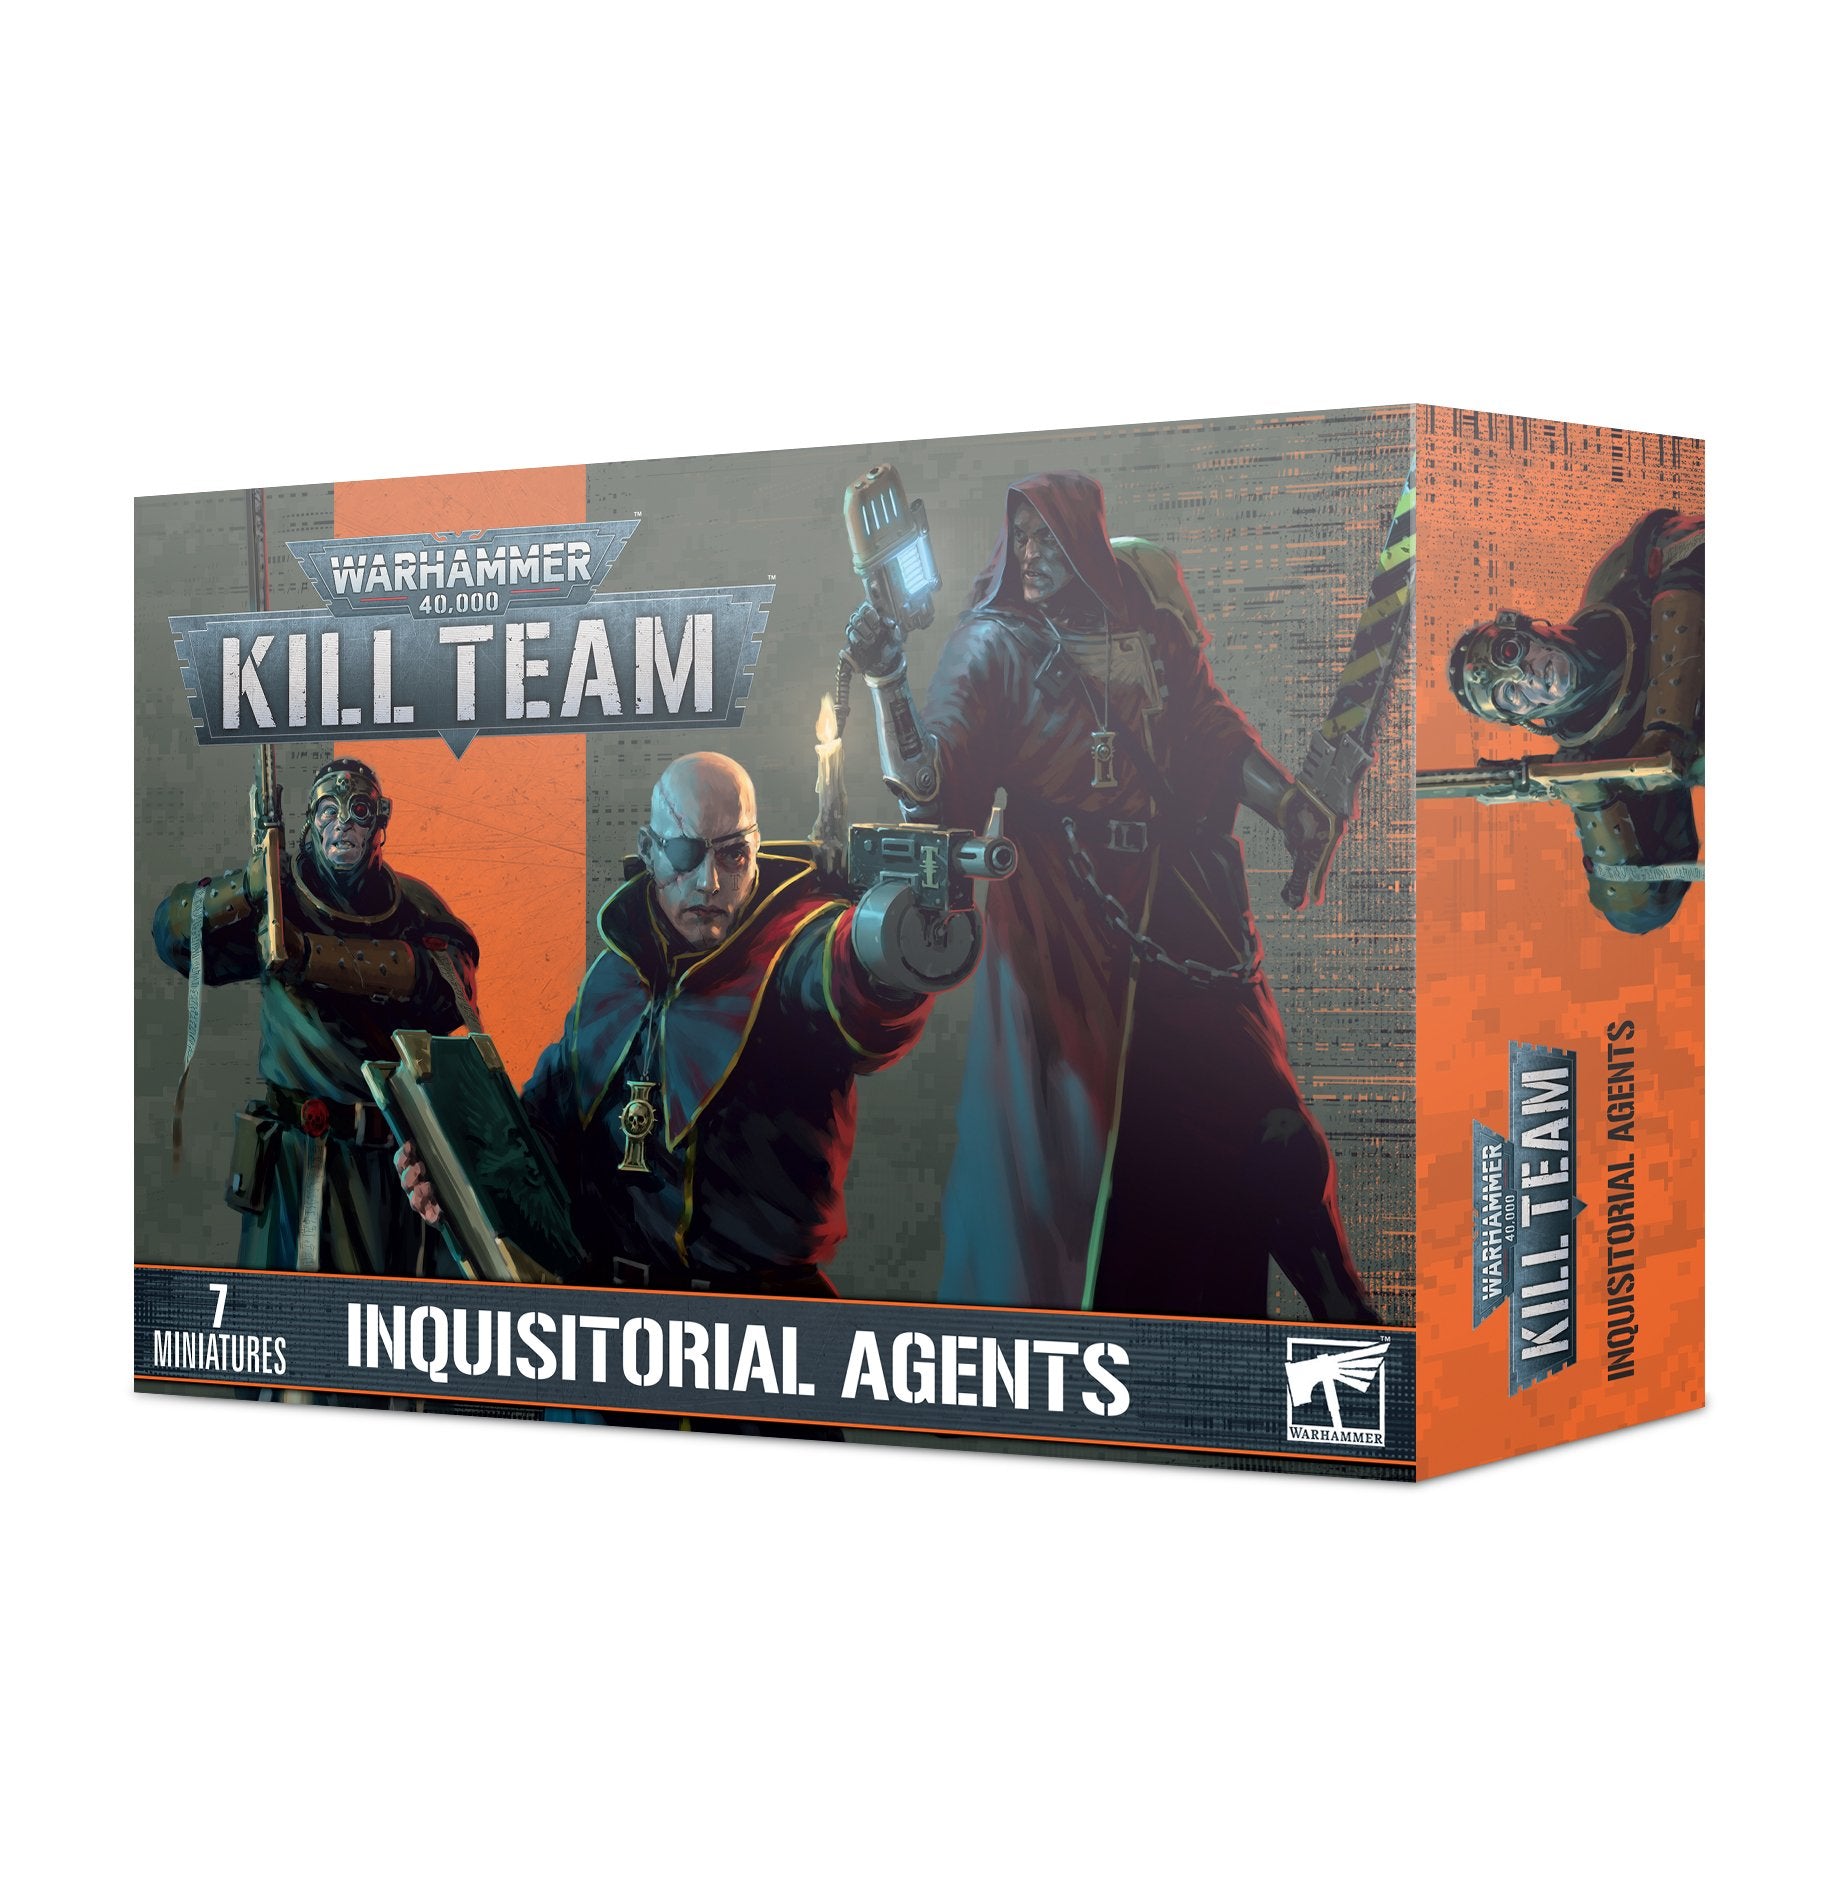 Kill Team: Inquisitorial Agents - Release Date 26/8/23 - Loaded Dice Barry Vale of Glamorgan CF64 3HD